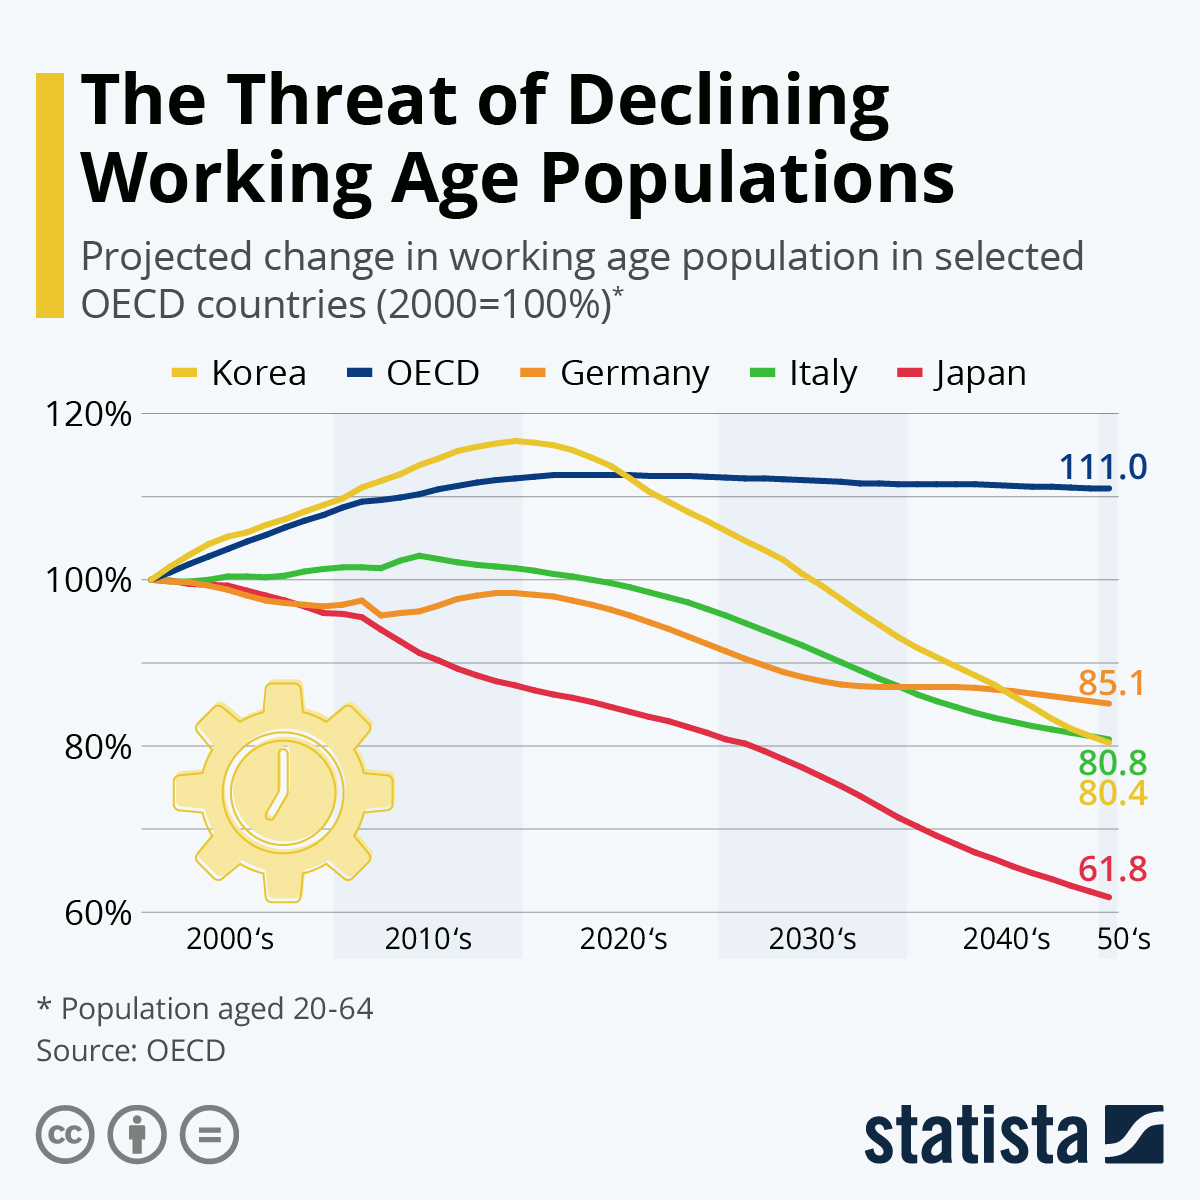 An increase in the working age population results in a